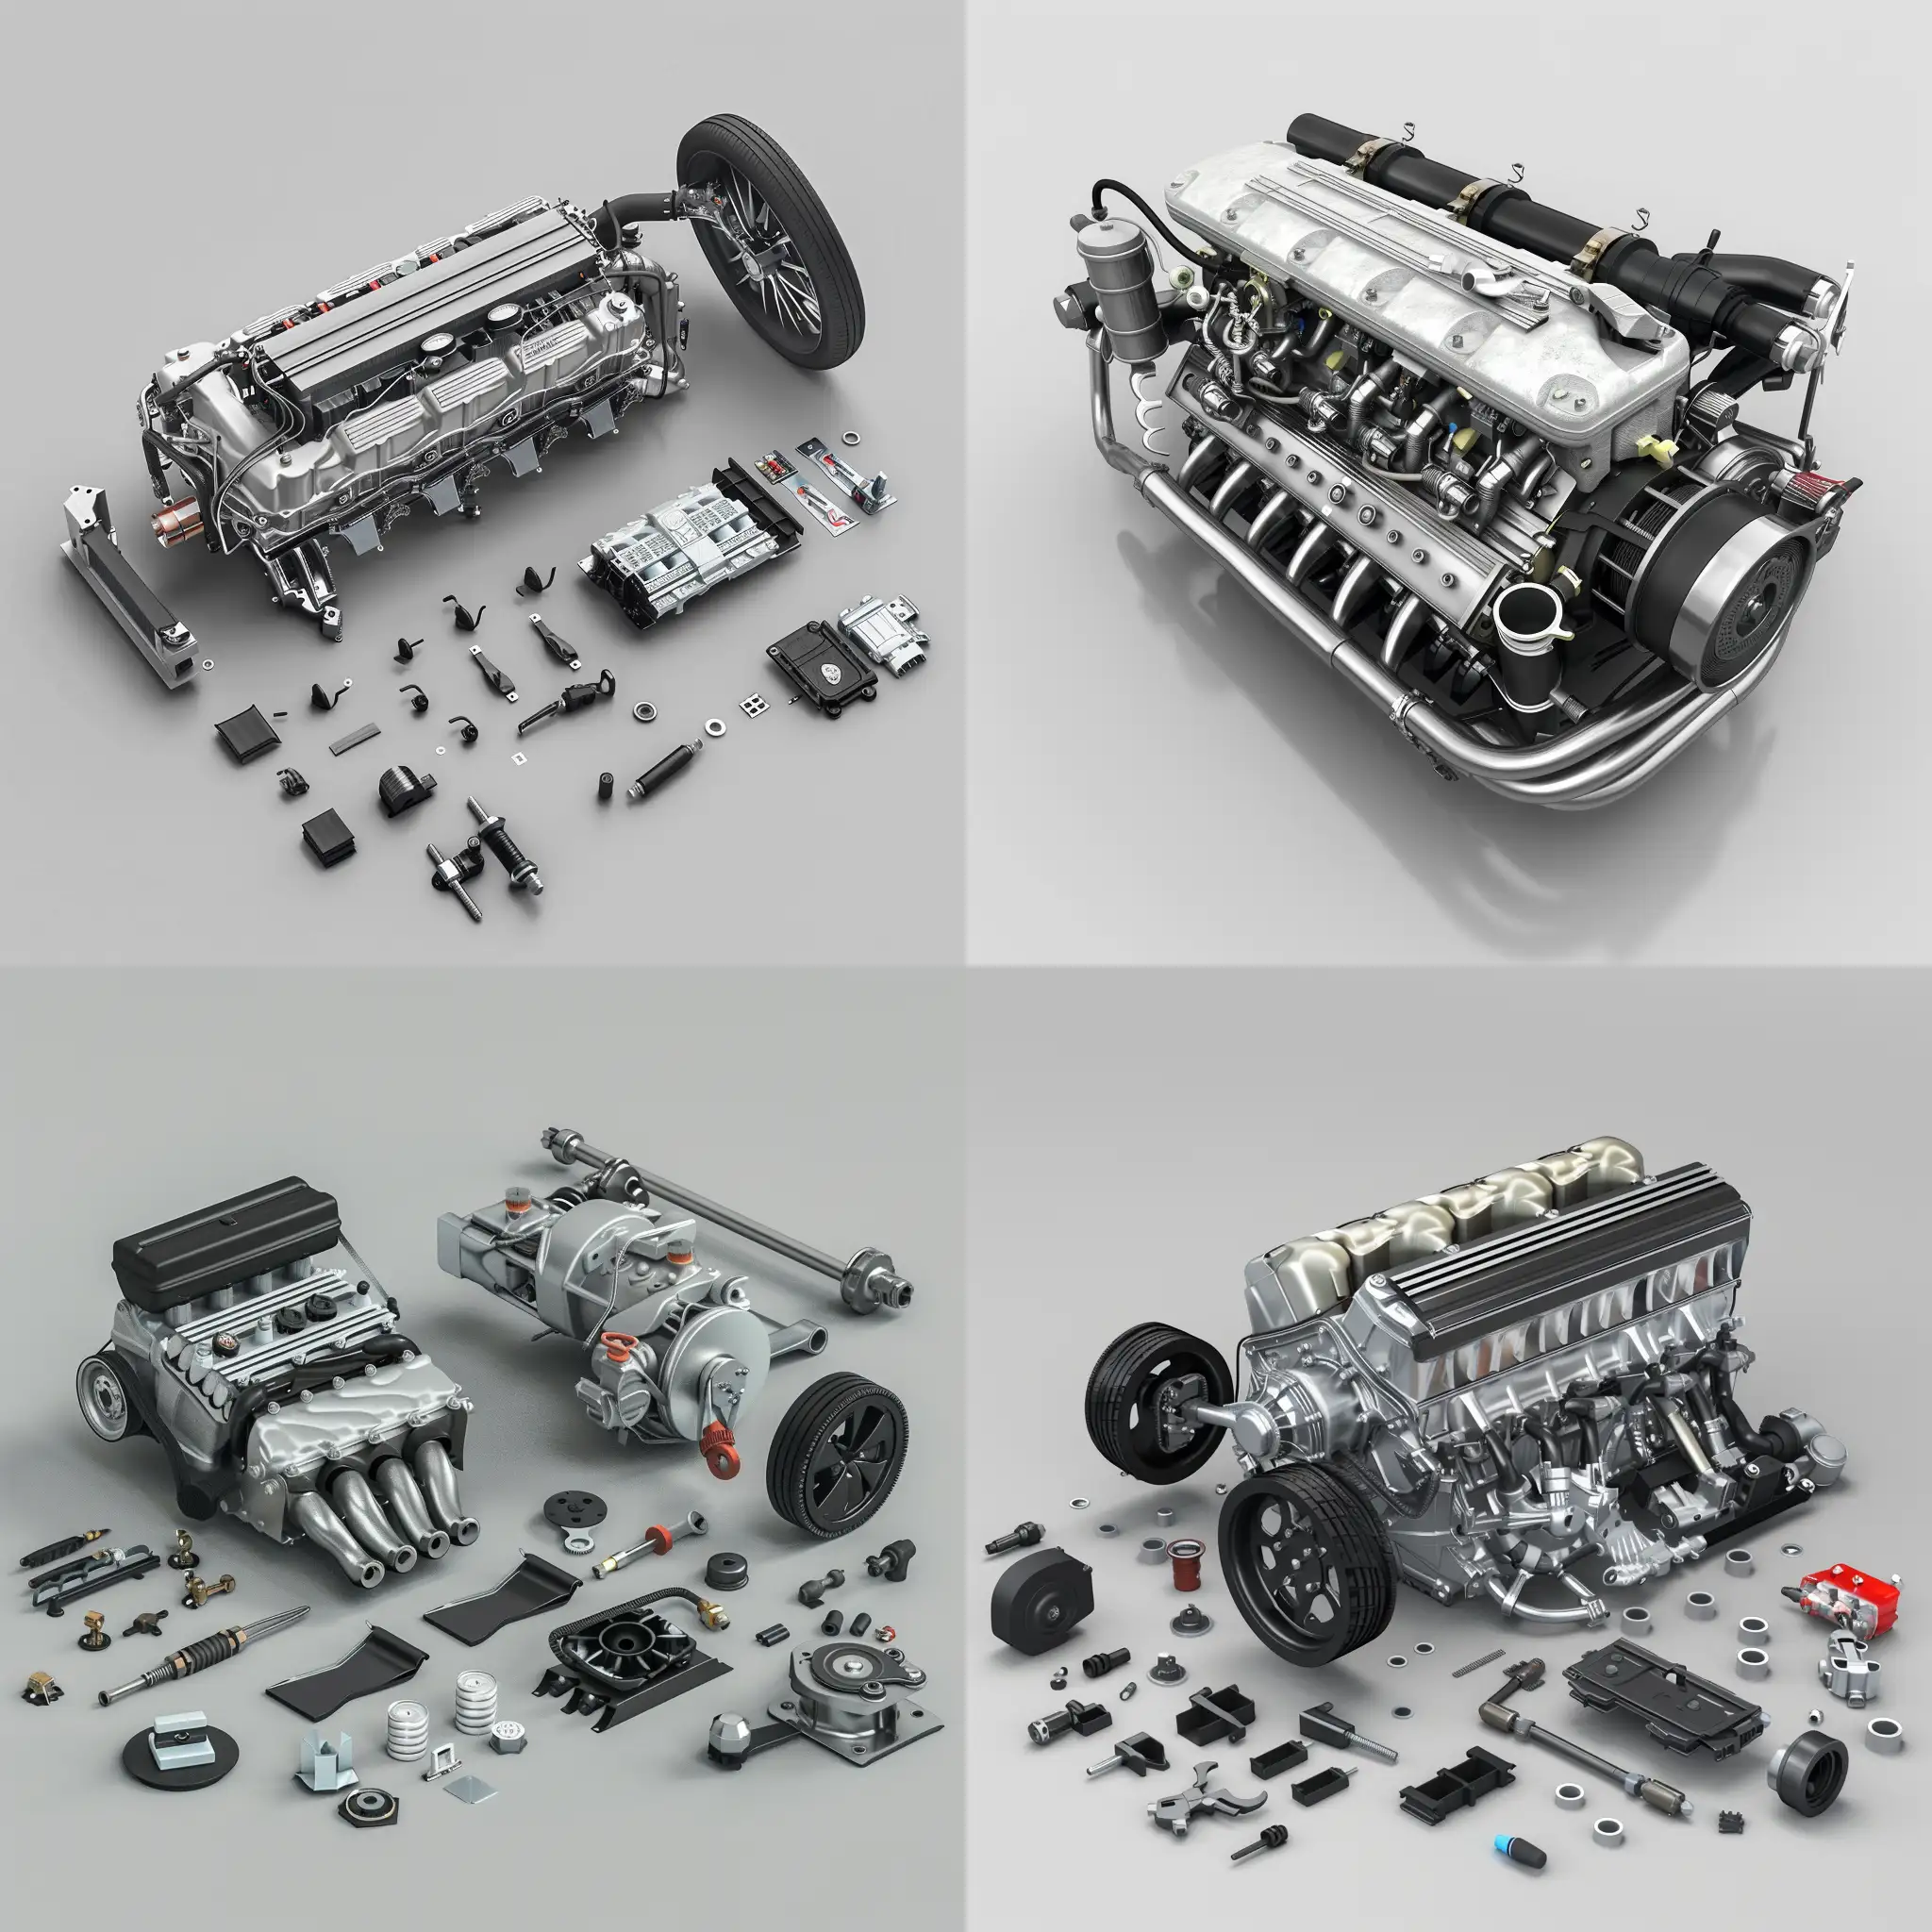 Car-Engine-Components-on-GrayWhite-Background